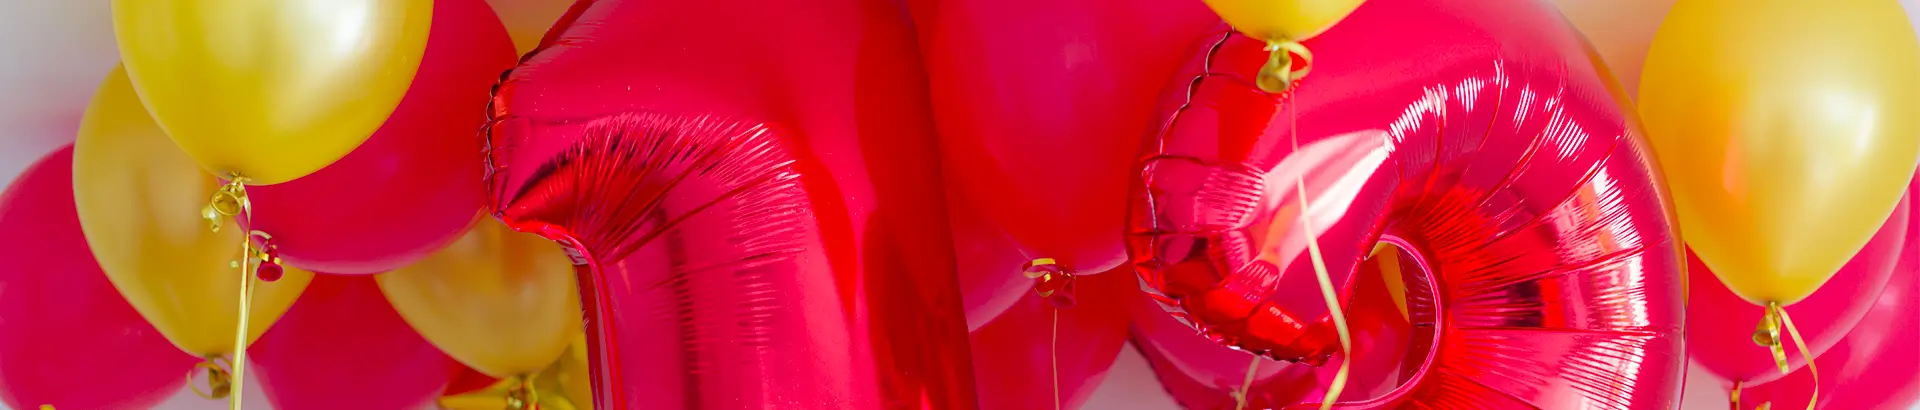 Ballons chiffres rouge